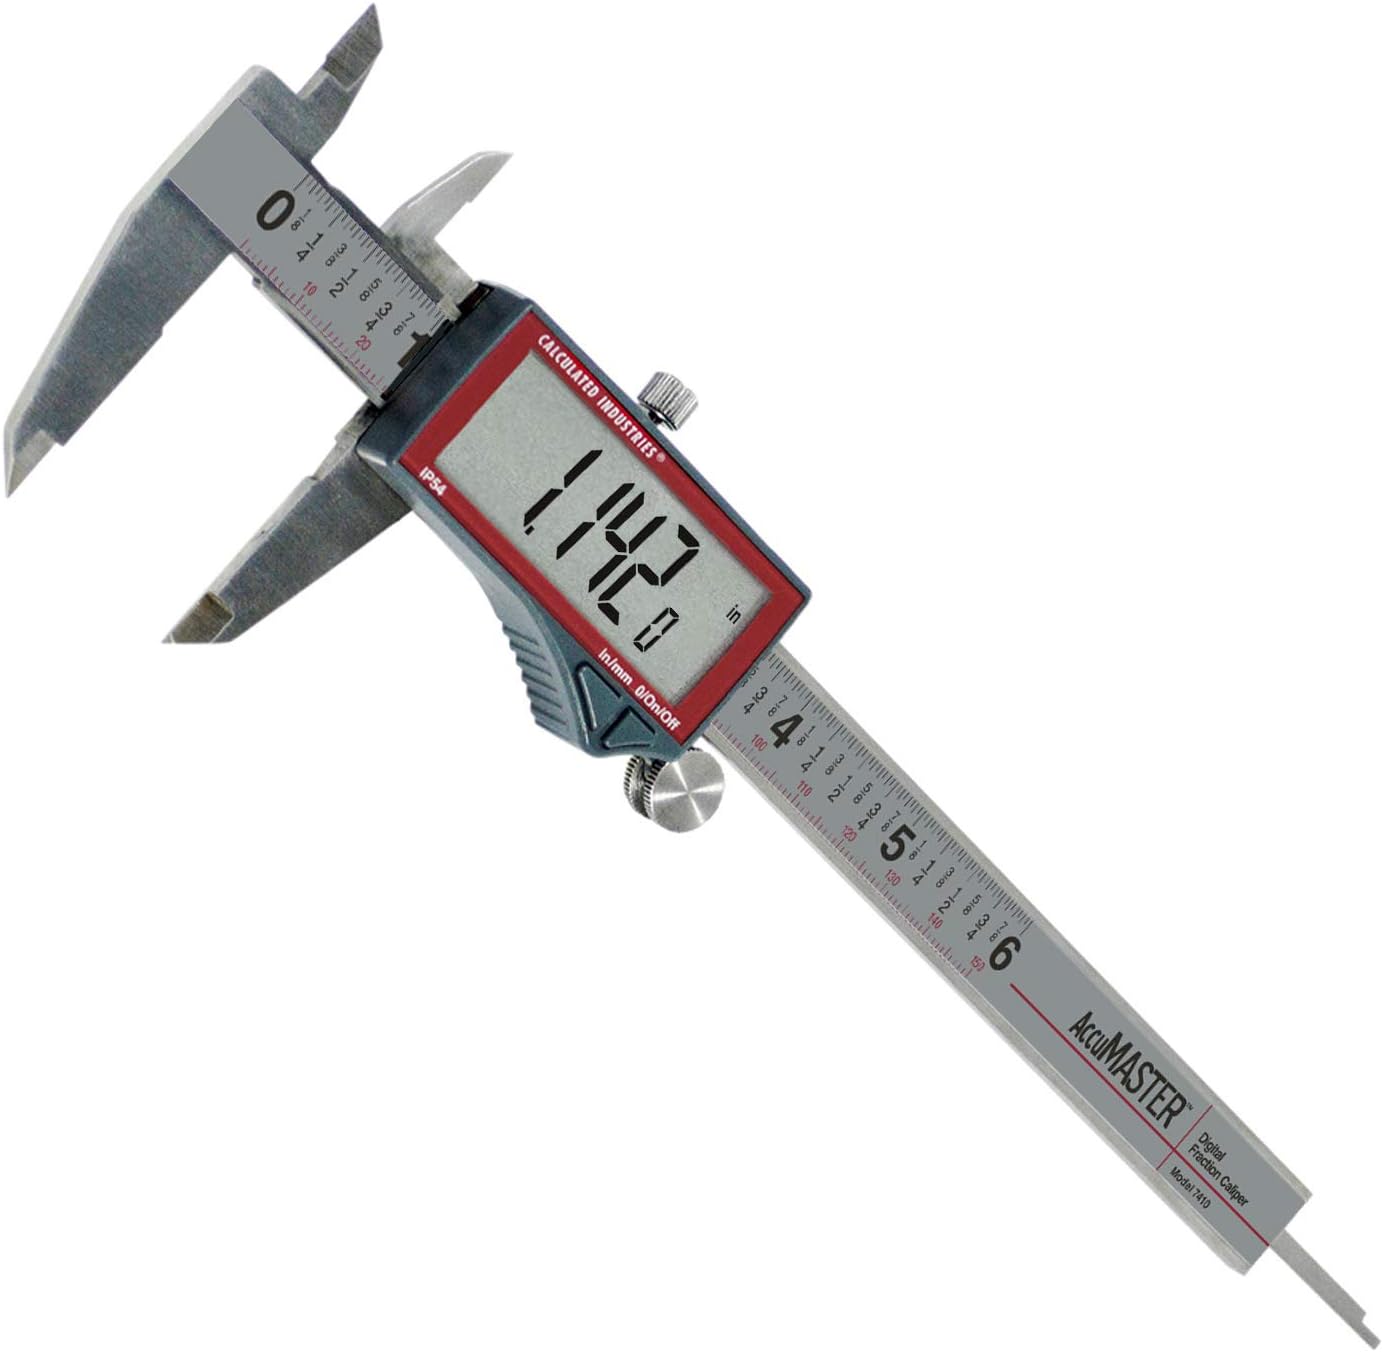 Calculated Industries 7410 AccuMASTER 6-Inch Digital Caliper, Fractional (1/64ths) + Inch + Metric with Largest Display Digits for Woodworkers | Stainless Steel | IP54 Splash/Dust Resistant | Auto-Off